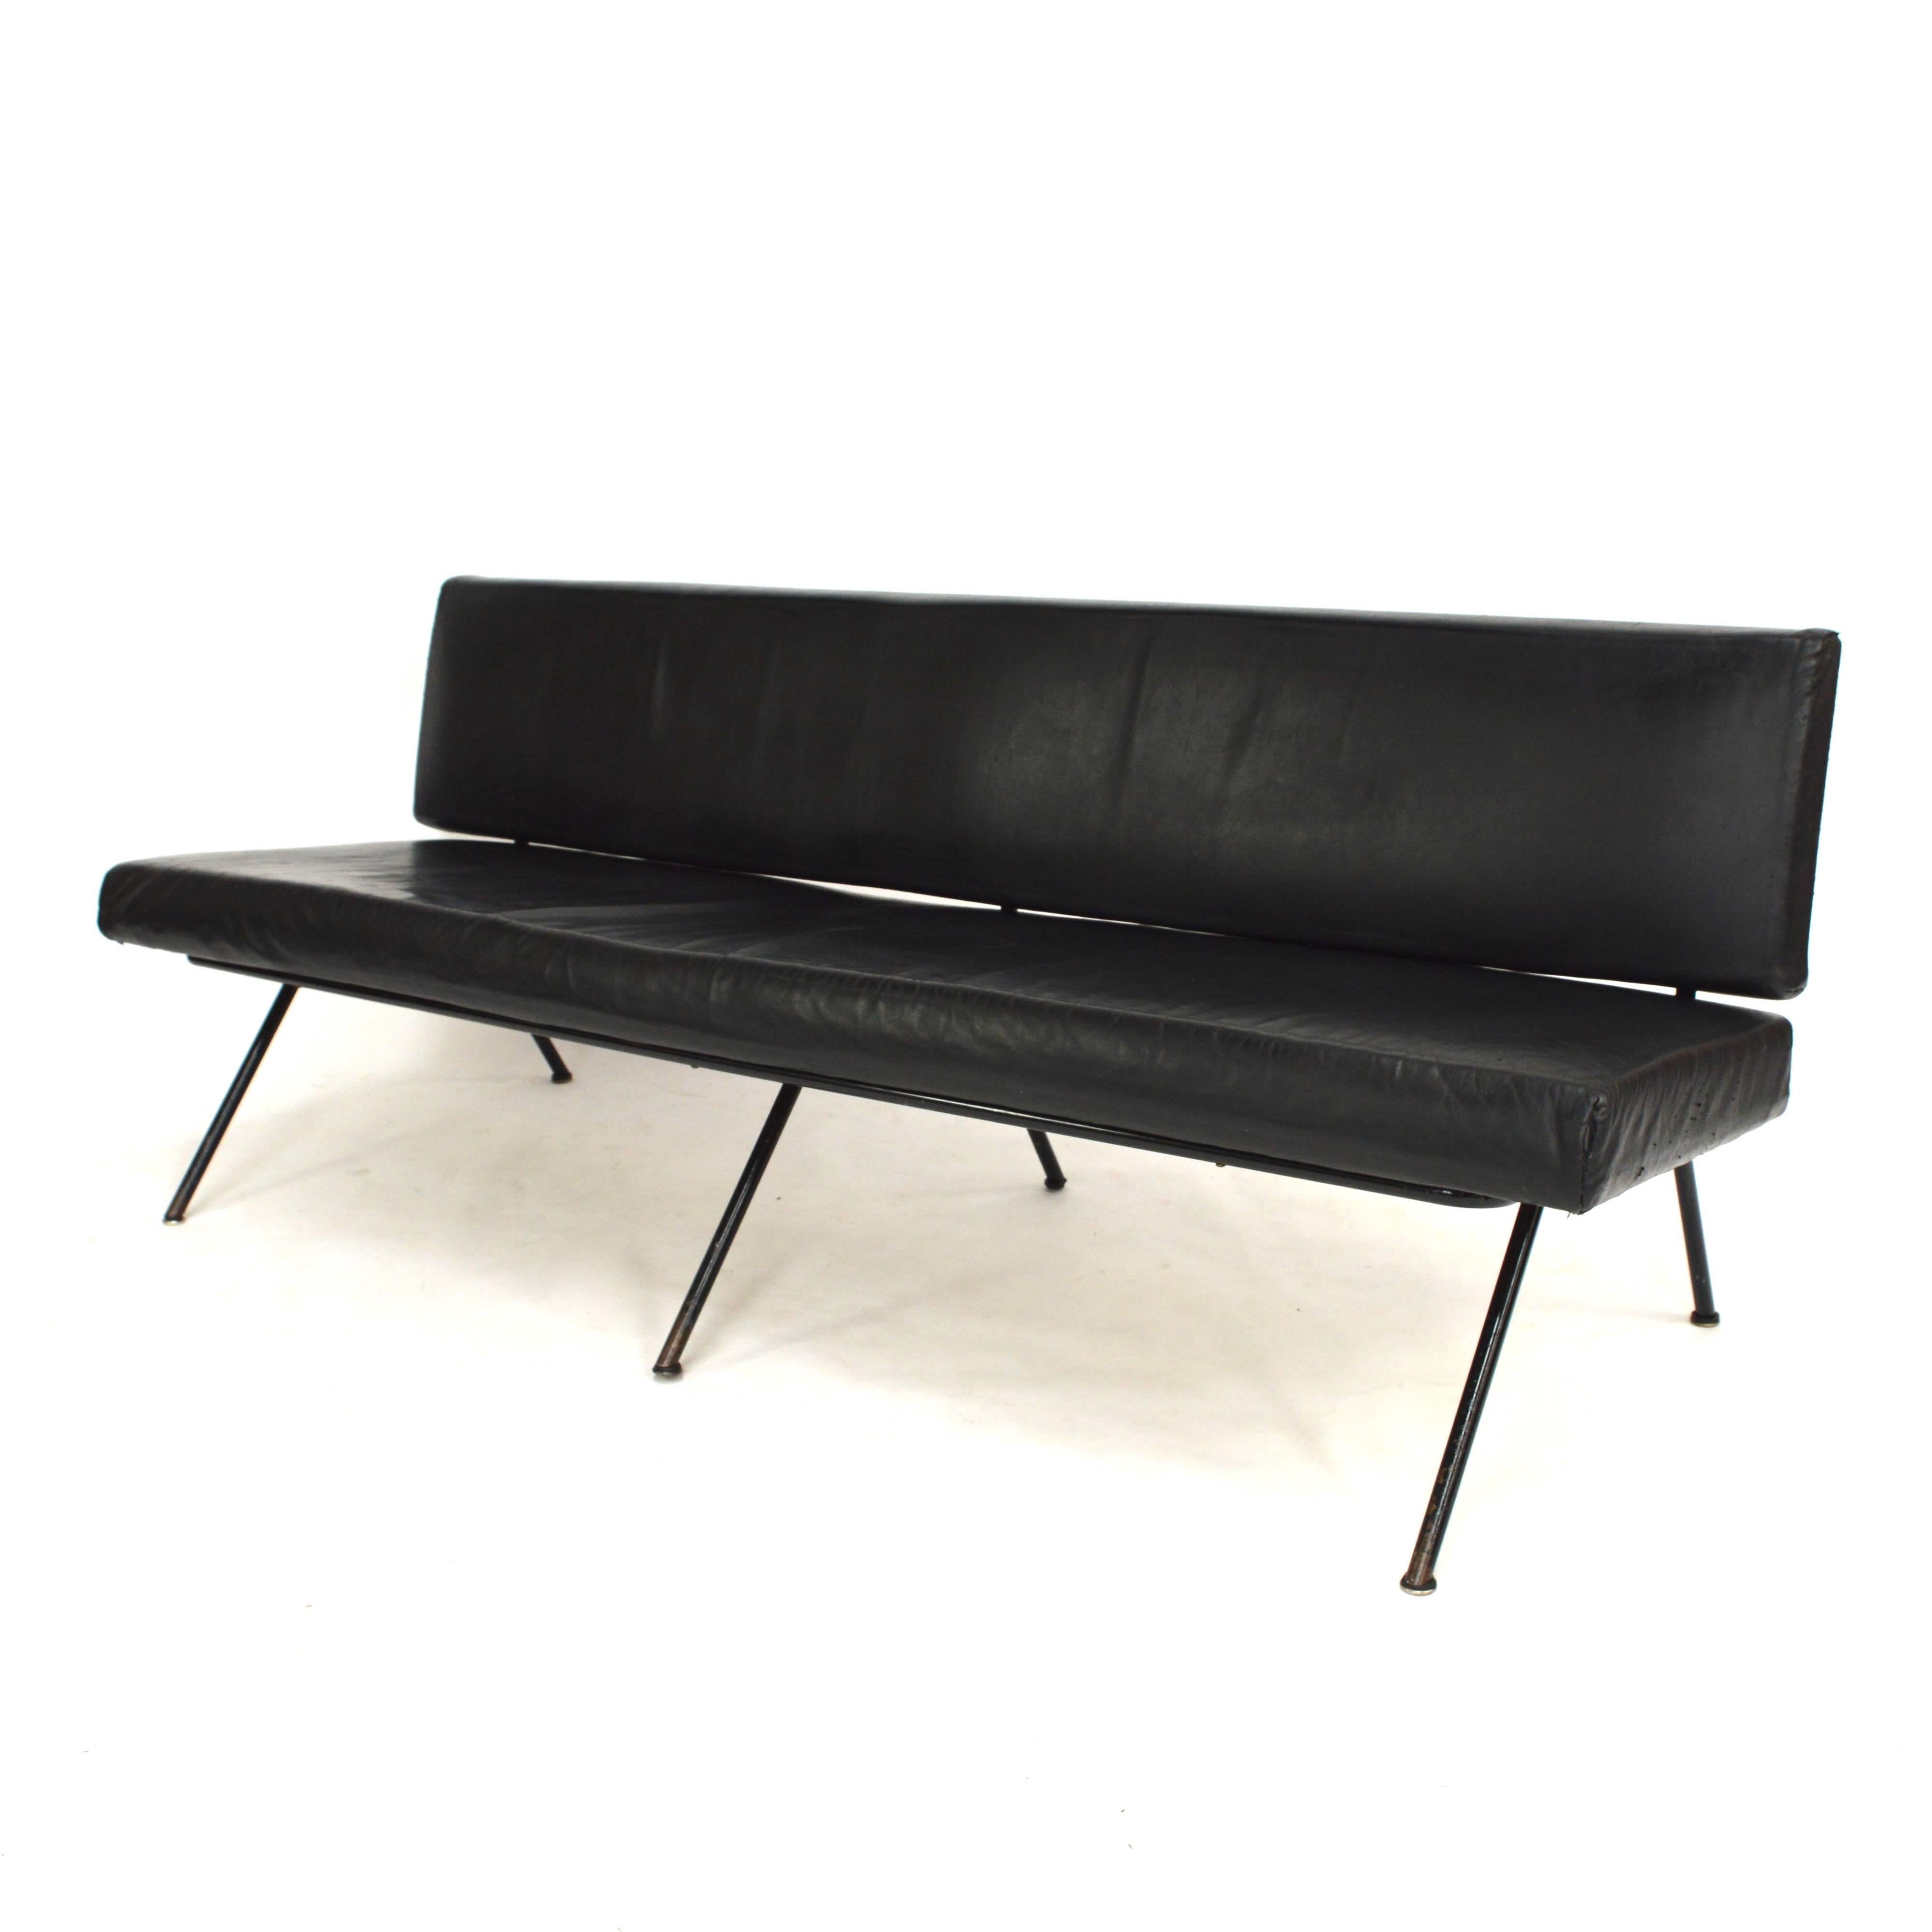 This rare model 32 sofa is in used condition but still original.

Designer: Florence Knoll Bassett

Manufacturer: Knoll Inc.

Country: USA

Model: 32 sofa

Design period: 1954

Date of manufacturing: 1950s

Size W x D x H in cm: 180 x